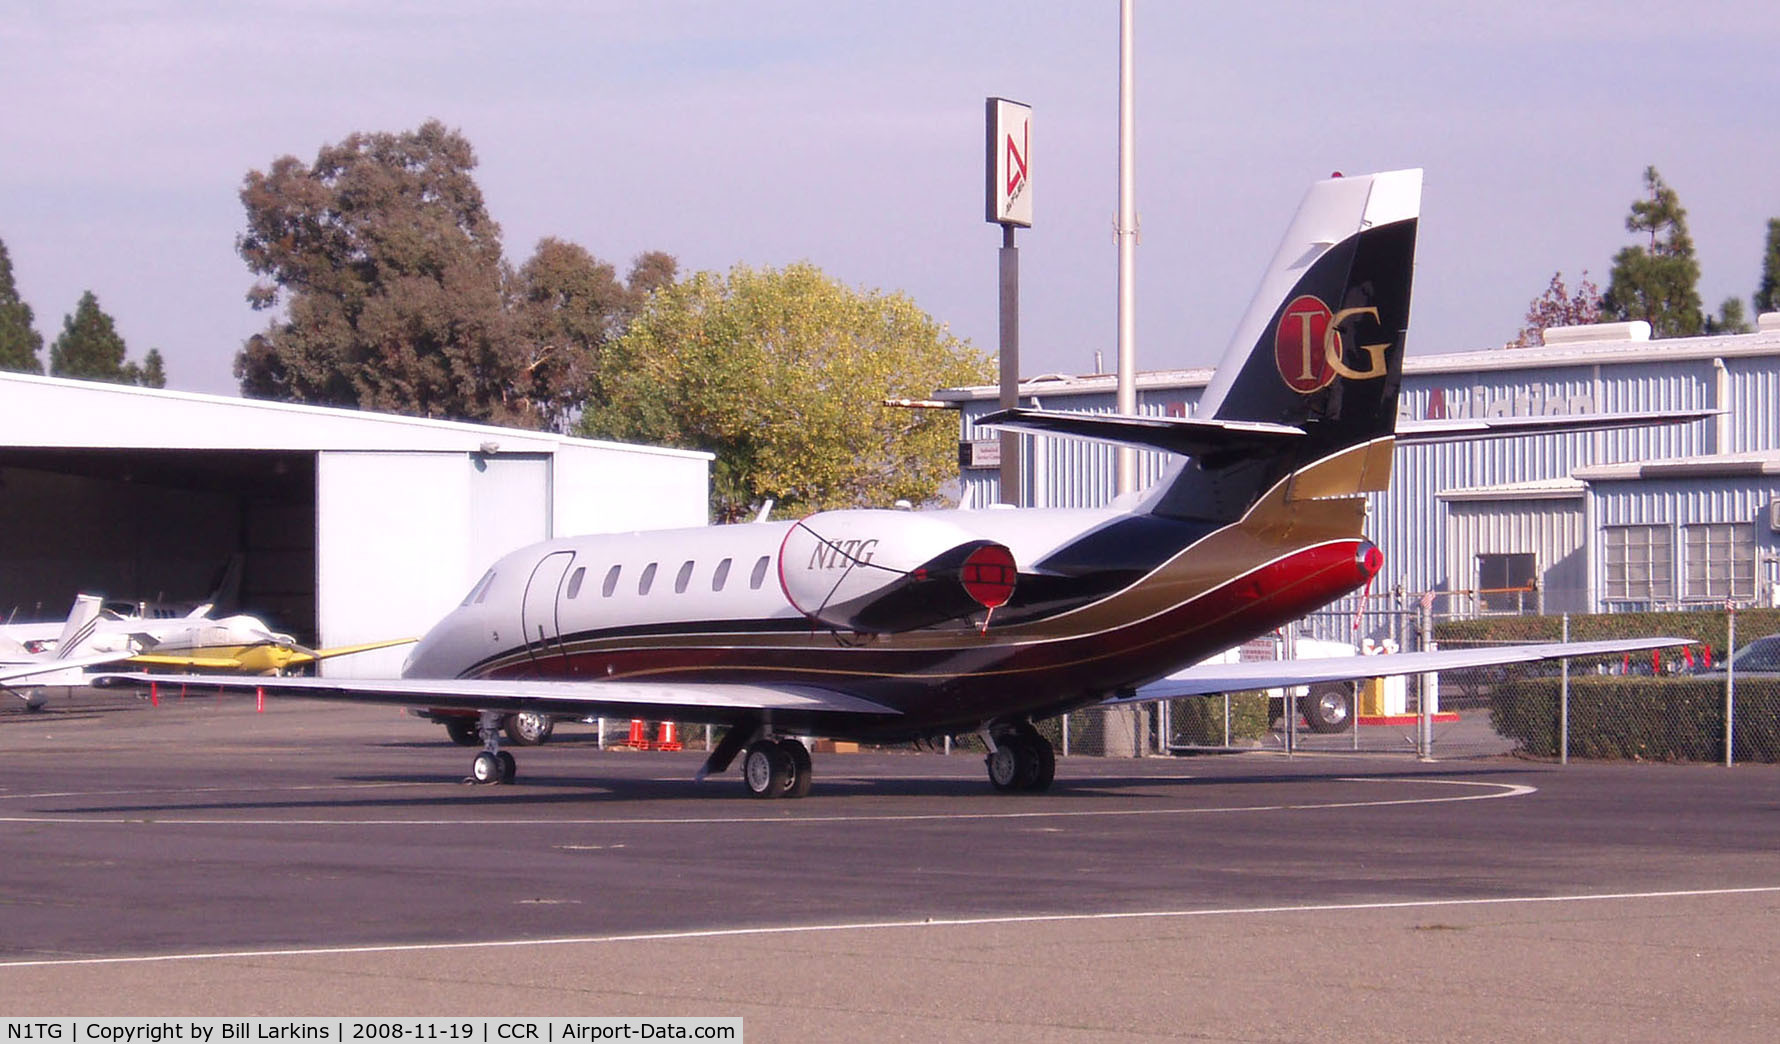 N1TG, 2007 Cessna 680 Citation Sovereign C/N 680-0147, Beautiful, unusual colors for a corporate jet.